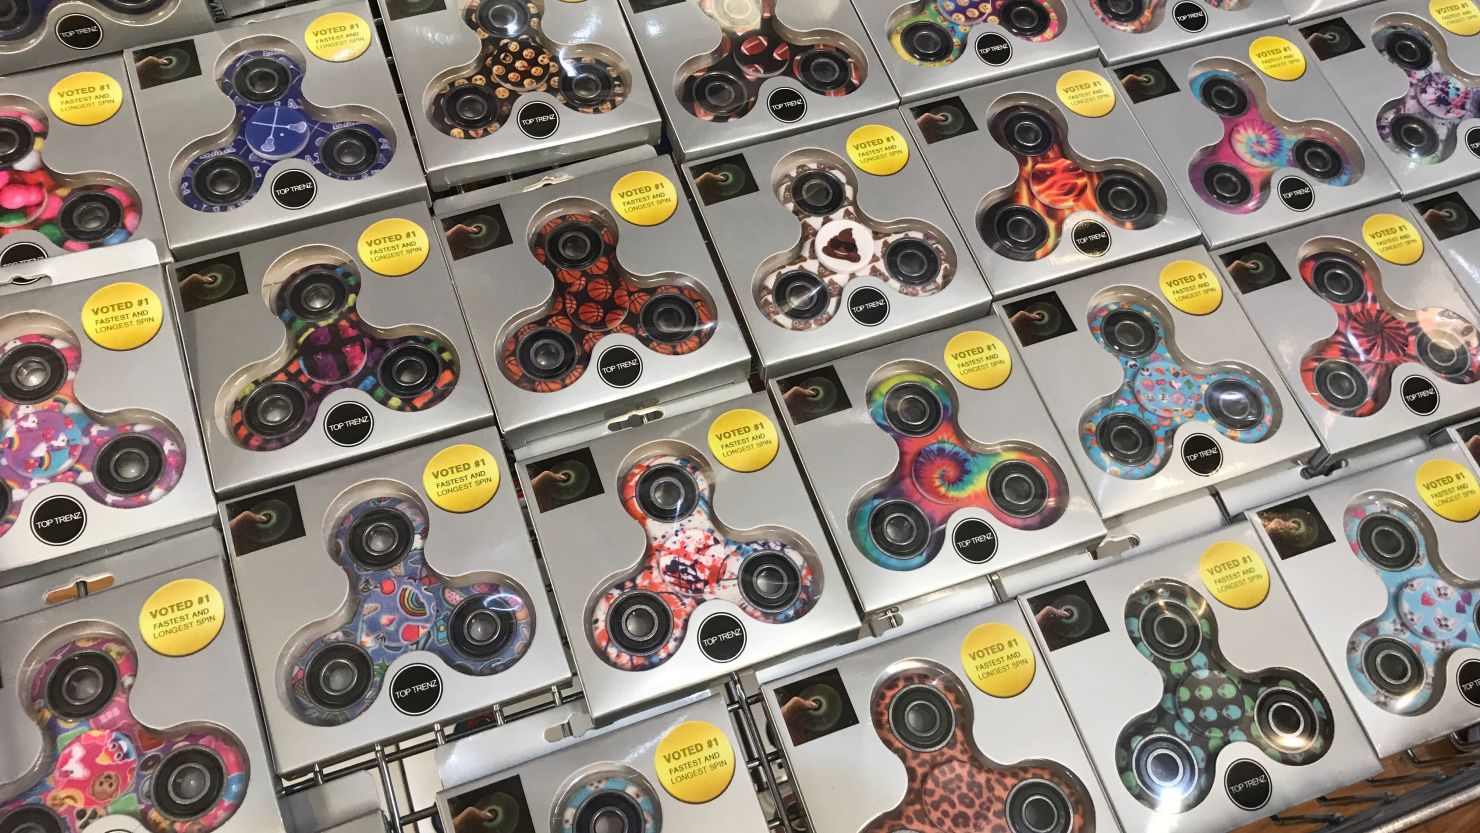 Fidget spinners, all the rage among teens around the world, are being investigated in Russia.